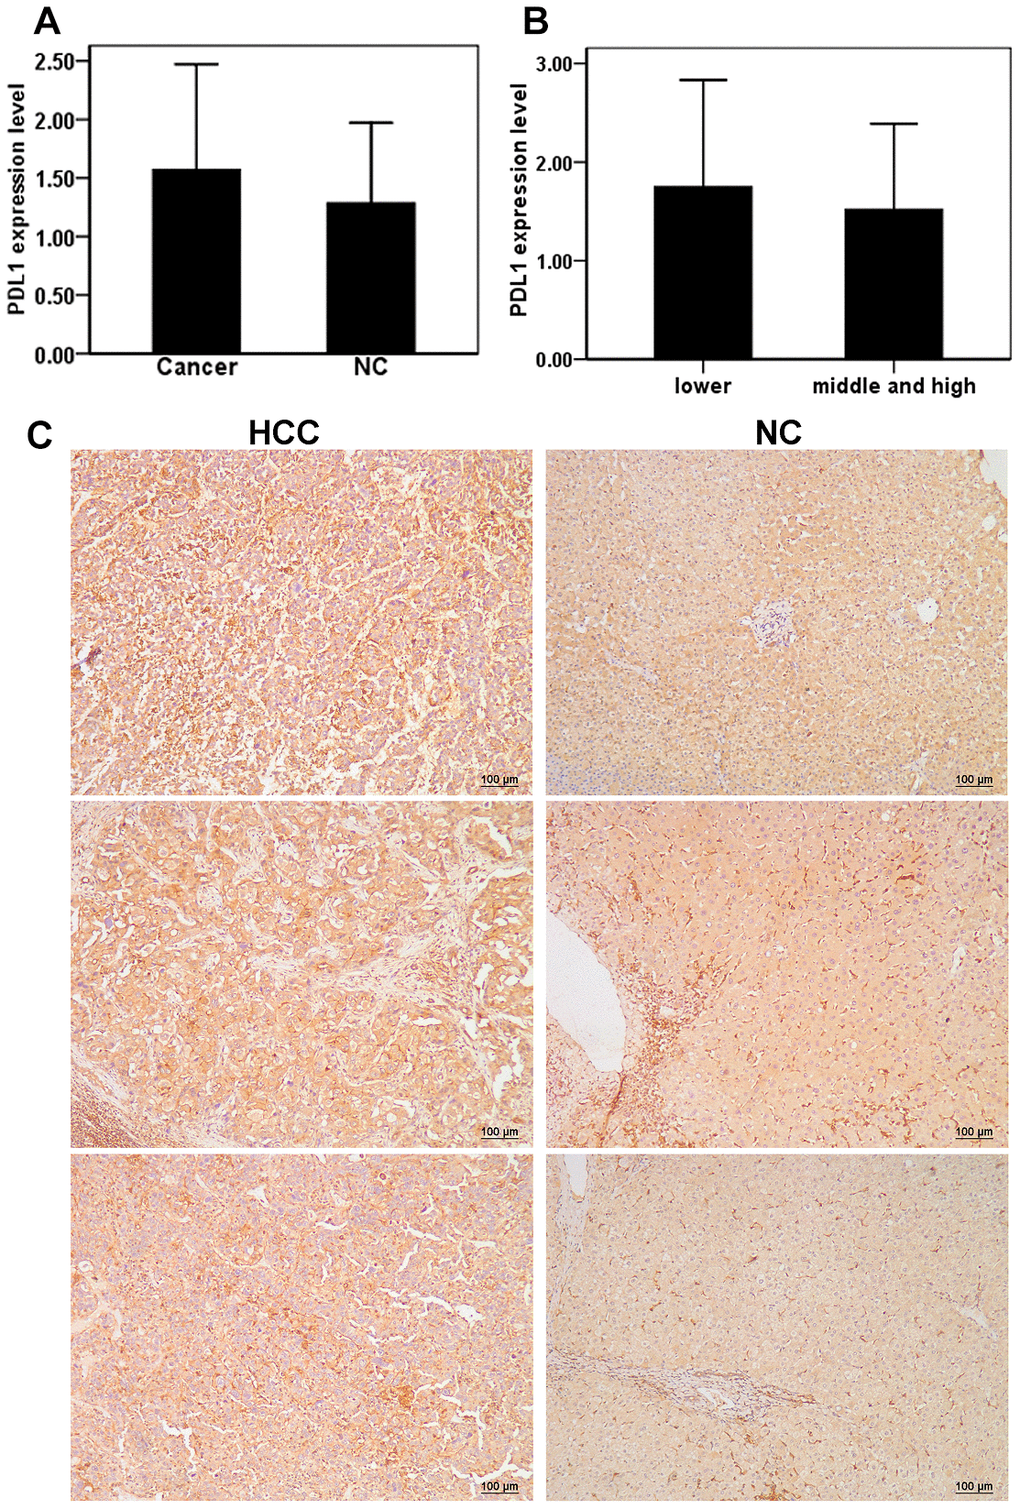 Expression of PD-L1 in cancer tissues and adjacent tissues of HCC patients. (A) The level of PD-L1 in hepatocellular carcinoma and adjacent tissues; (B) Relationship between the levels of PD-L1 and differentiation of hepatocellular carcinoma; (C) Repressive images of PD-L1 expression in hepatocellular carcinoma and adjacent tissues.